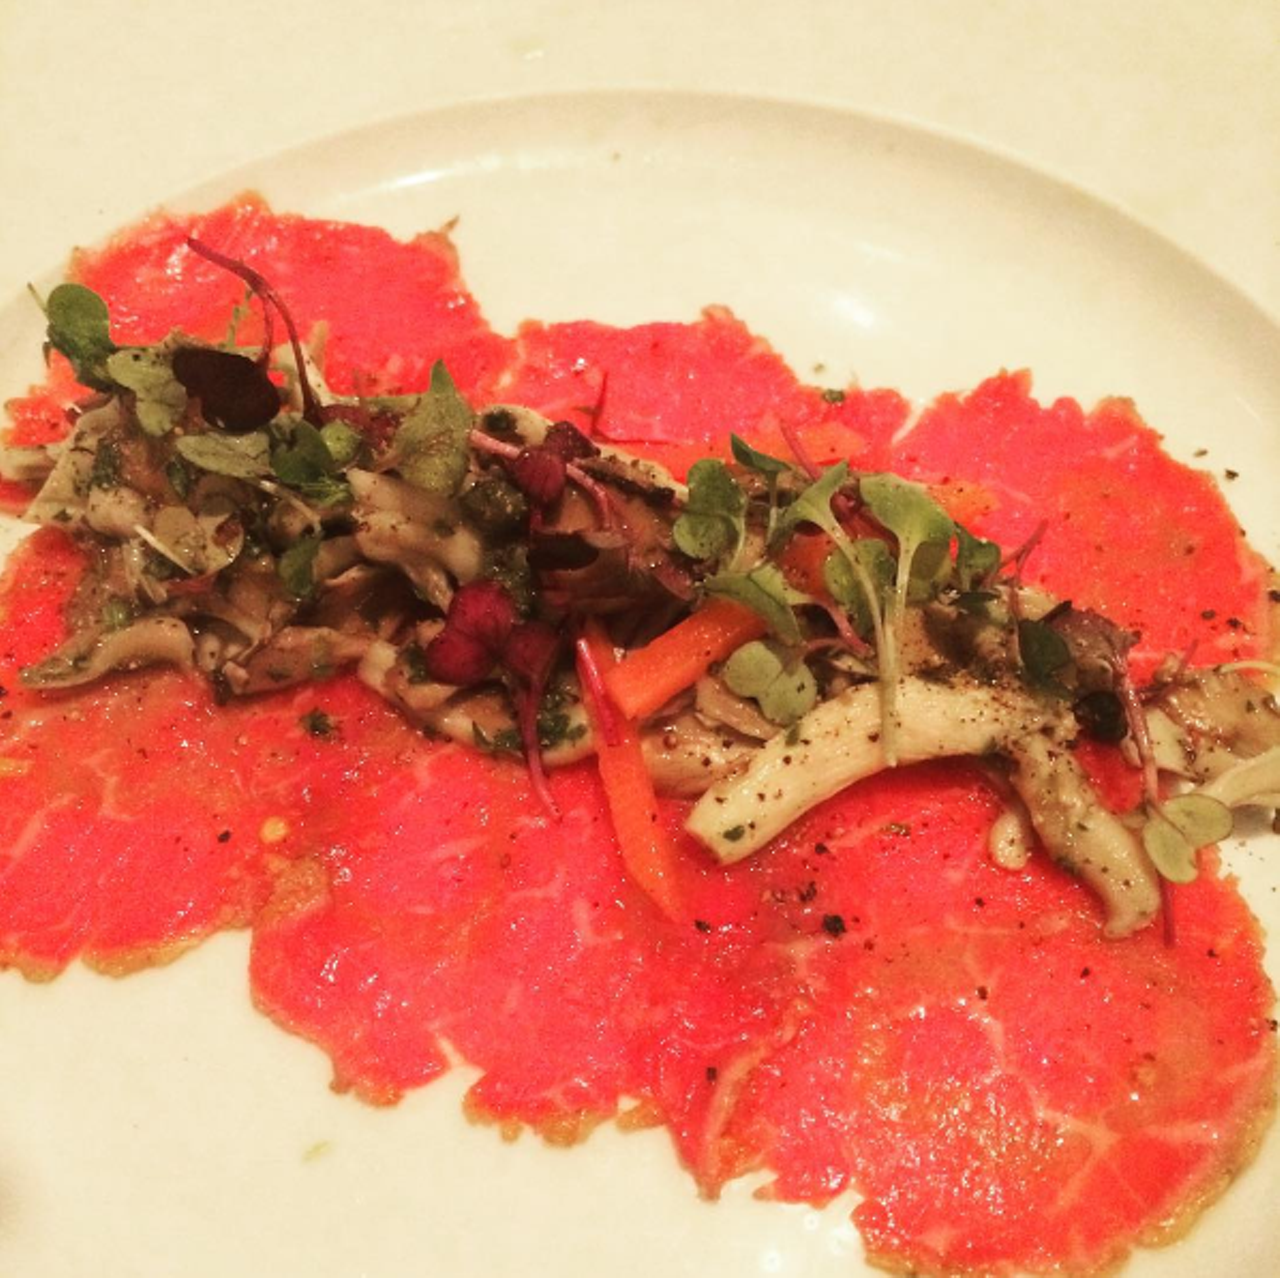  Carpaccio at Ravello at Four Seasons Orlando
Unless you&#146;re on an expense account, MDM is the perfect time to try the epic(ally expensive) Italian eatery. The carpaccio of Piedmontese beef, cured mushrooms, pickled radish and watercress is a stand out.
10100 Dream Tree Blvd., 407-313-7777
Photo via rahwayemane/Instagram